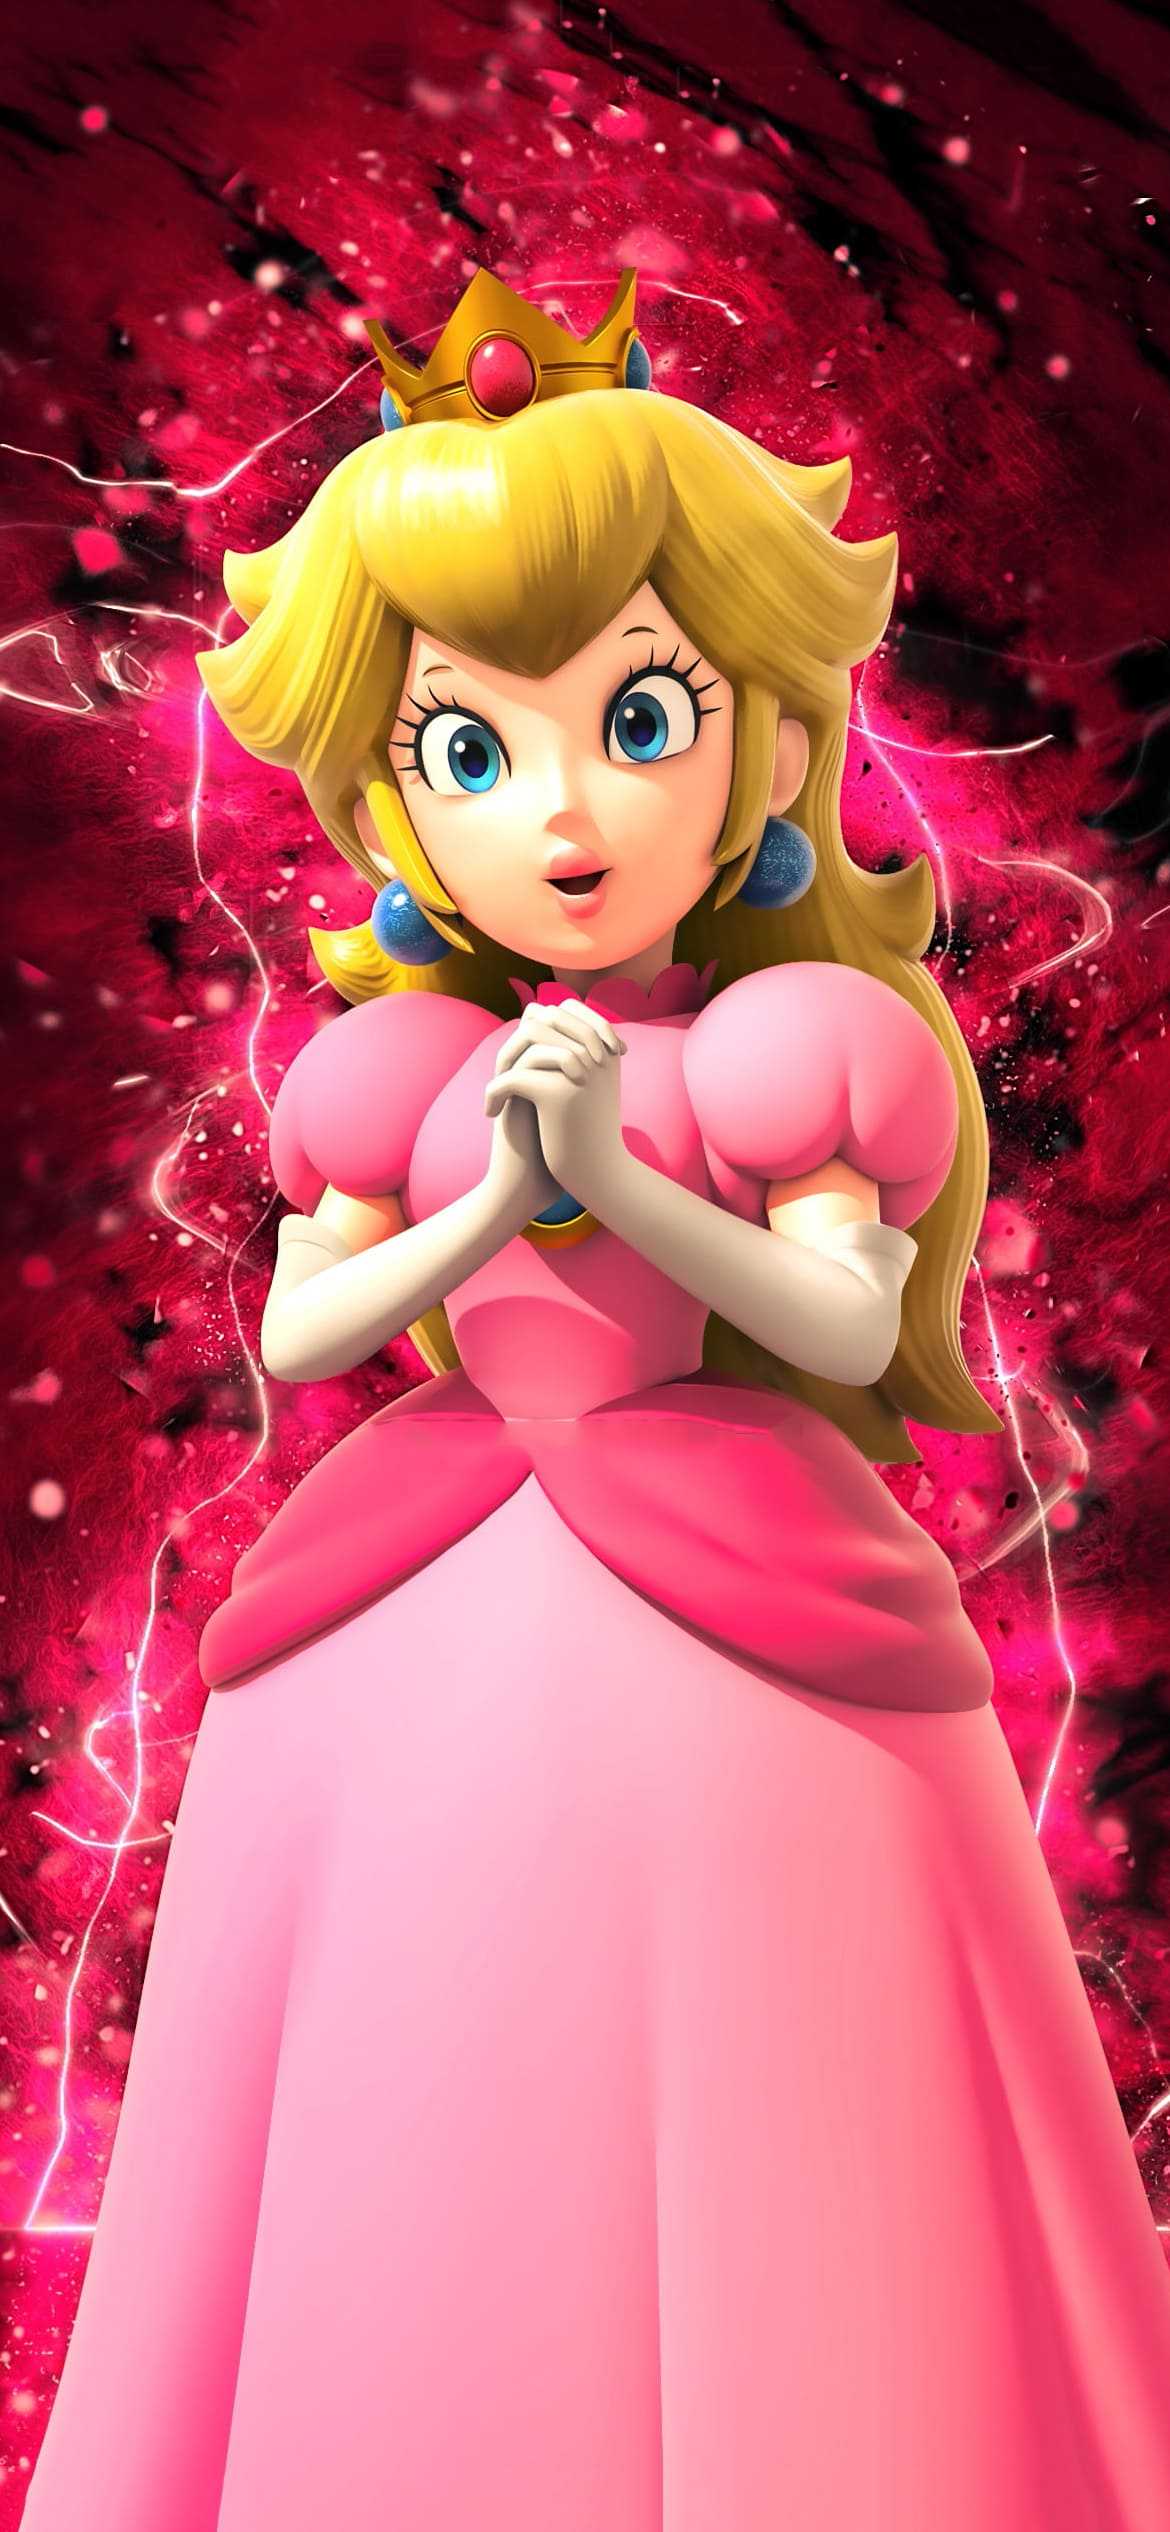 Princess Peach iPhone Wallpaper with high-resolution 1080x1920 pixel. You can use this wallpaper for your iPhone 5, 6, 7, 8, X, XS, XR backgrounds, Mobile Screensaver, or iPad Lock Screen - Princess Peach